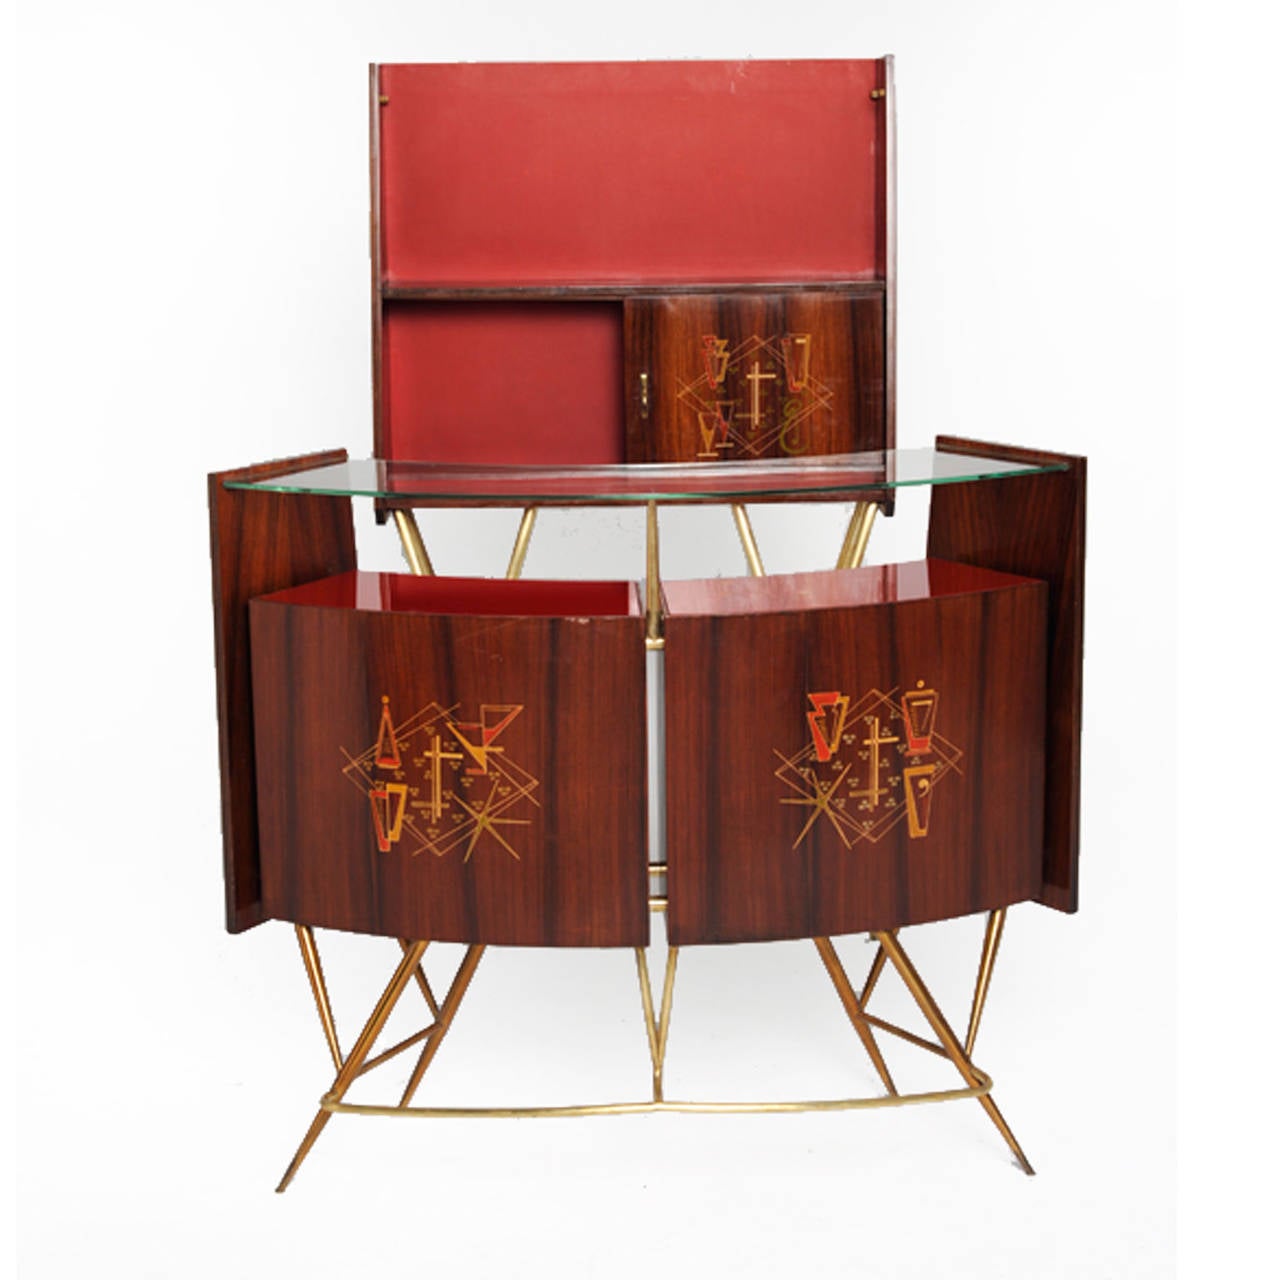 Dry bar composed by bar and back shelves made in solid wood and covered in rosewood. Geometrical decorative pattern in front and finished in brass. Italy 1950’s.